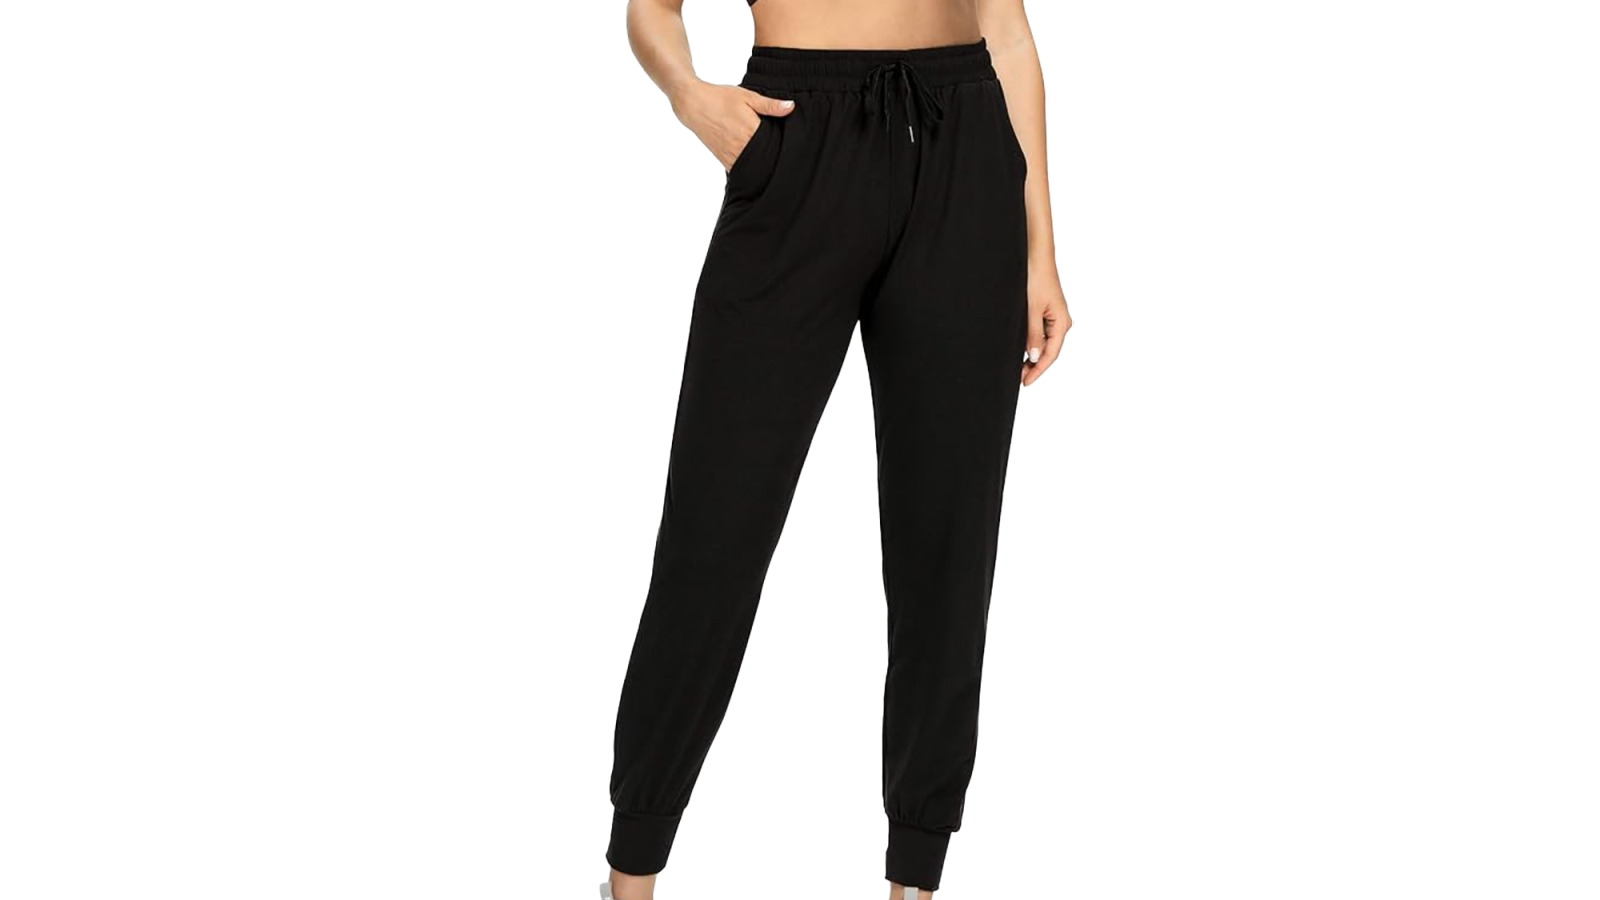 These 'Soft and Breathable' Amazon Sweatpants Are Only $14 | Us Weekly